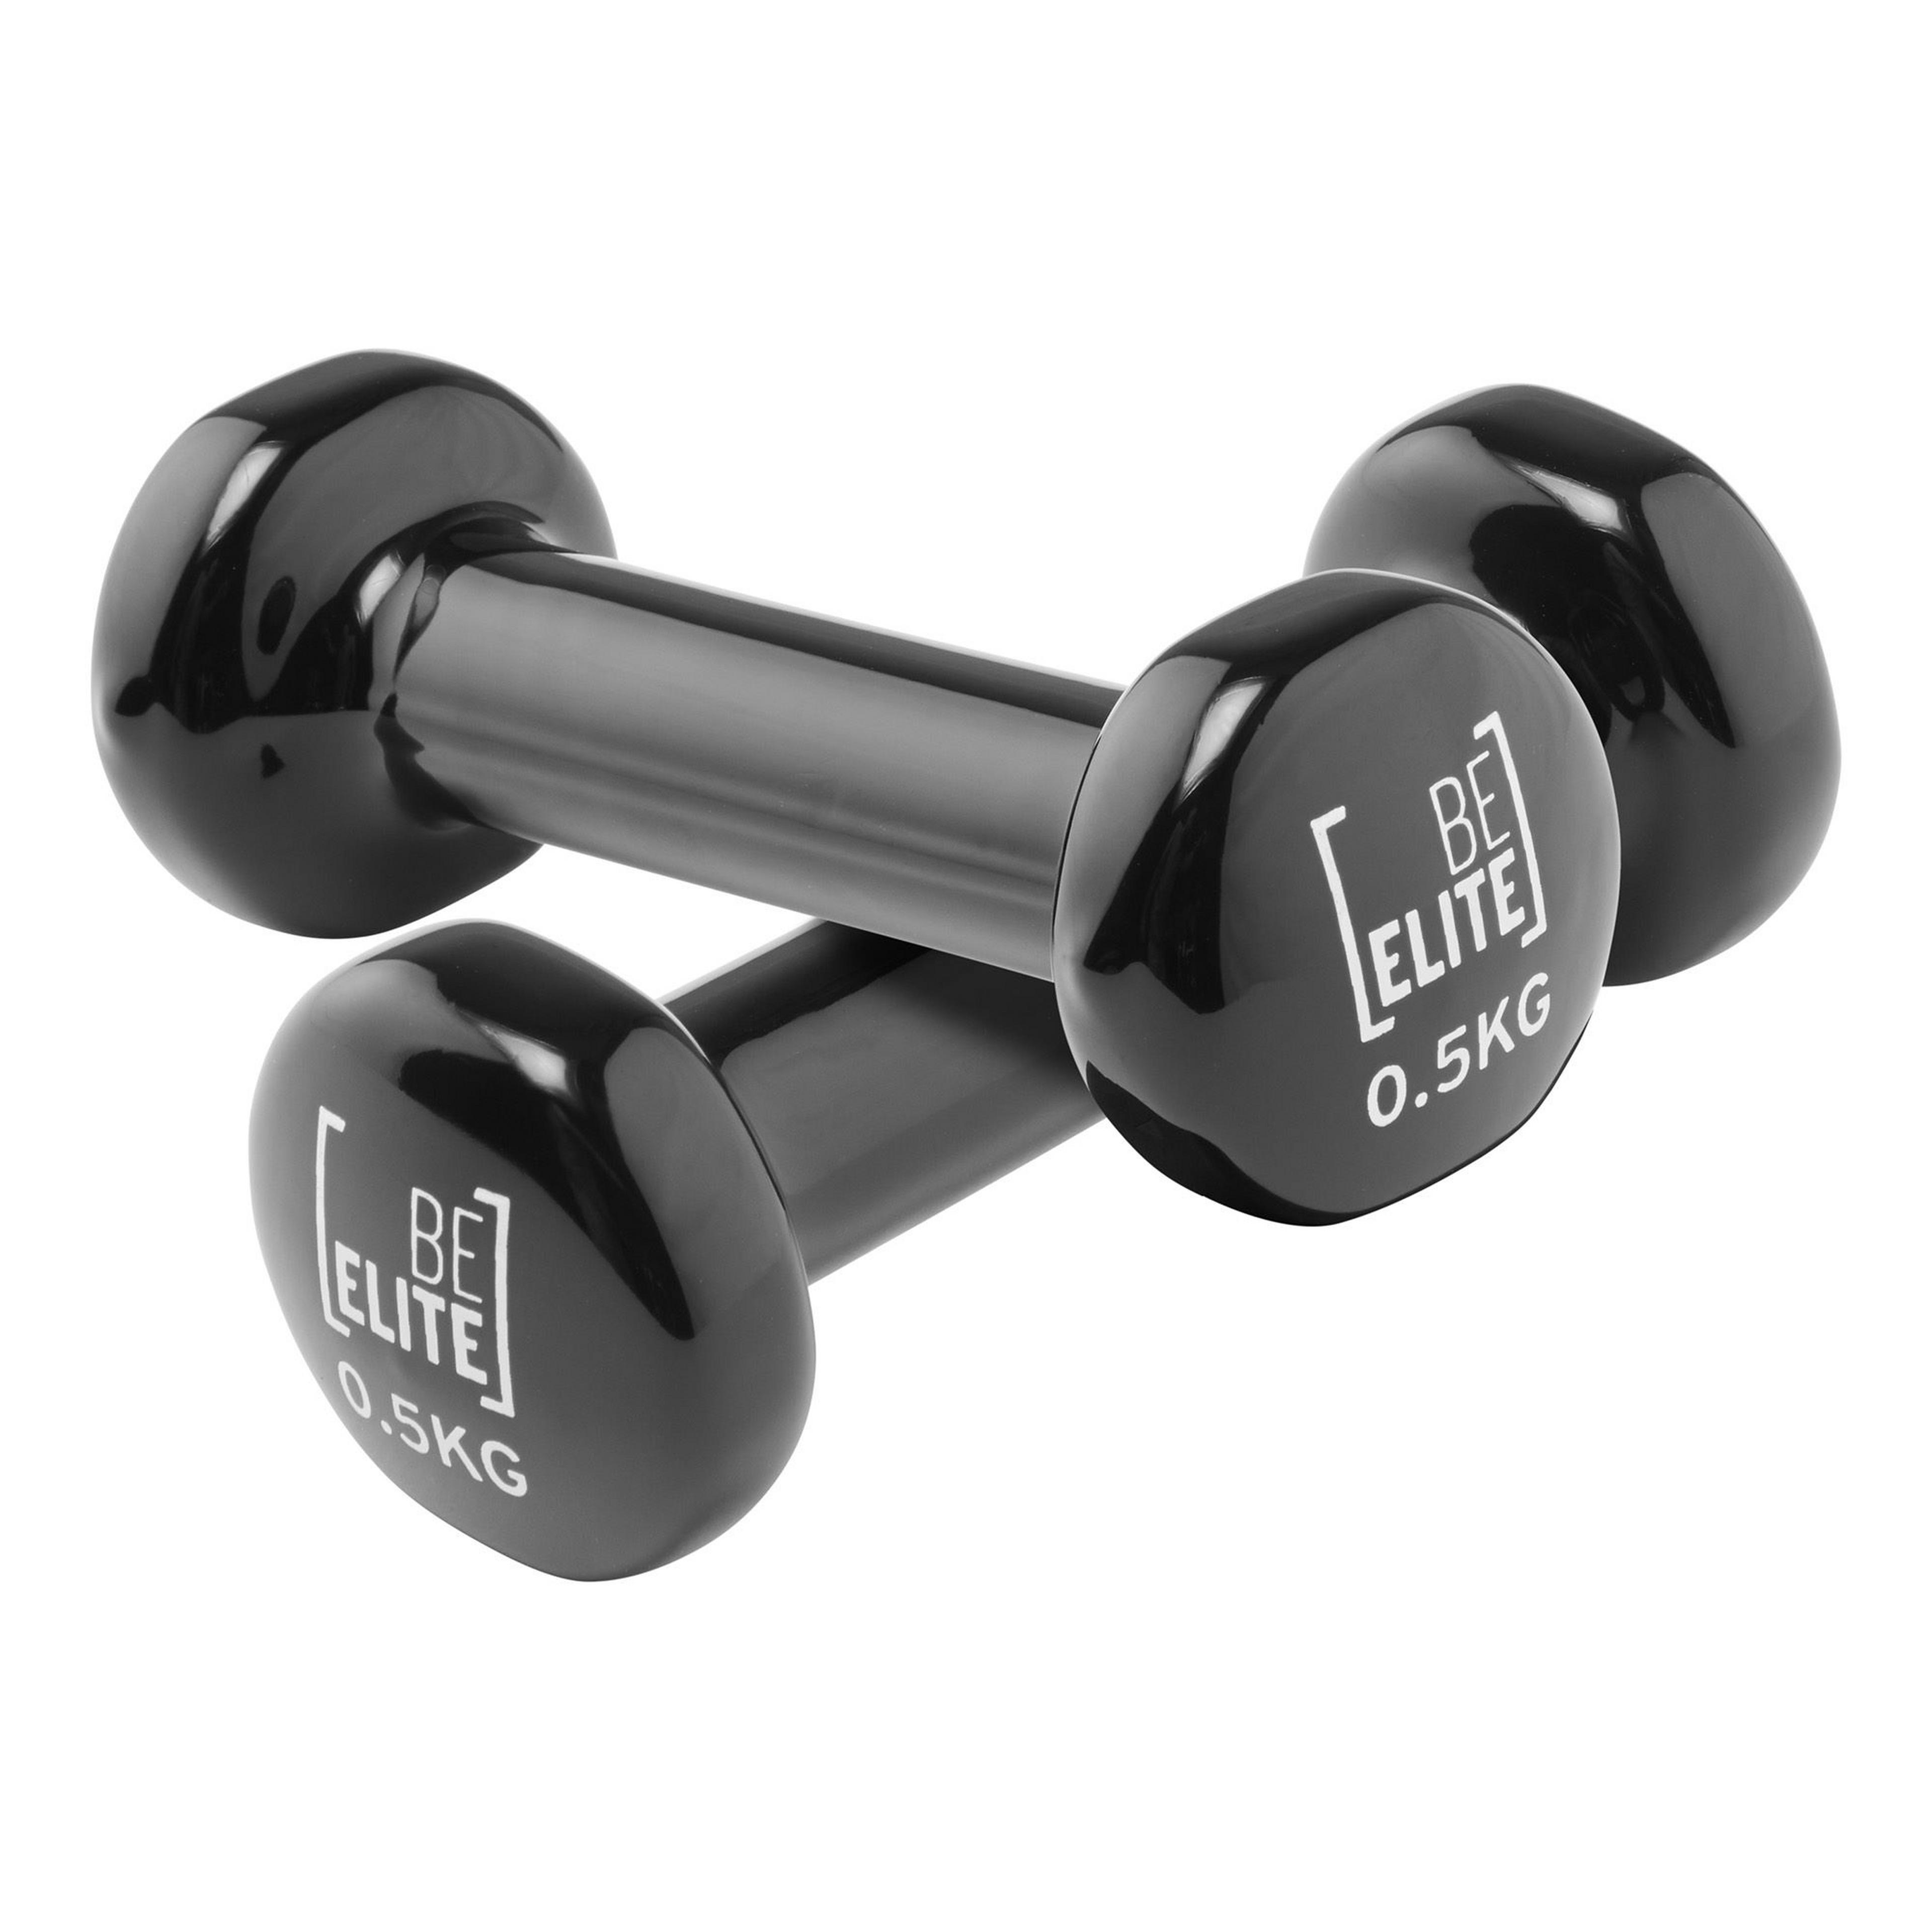 2x 0.5KG Vinyl Dumbbells Solid Dumbell Arm Hand Dumbbell Gym Weights  Strength